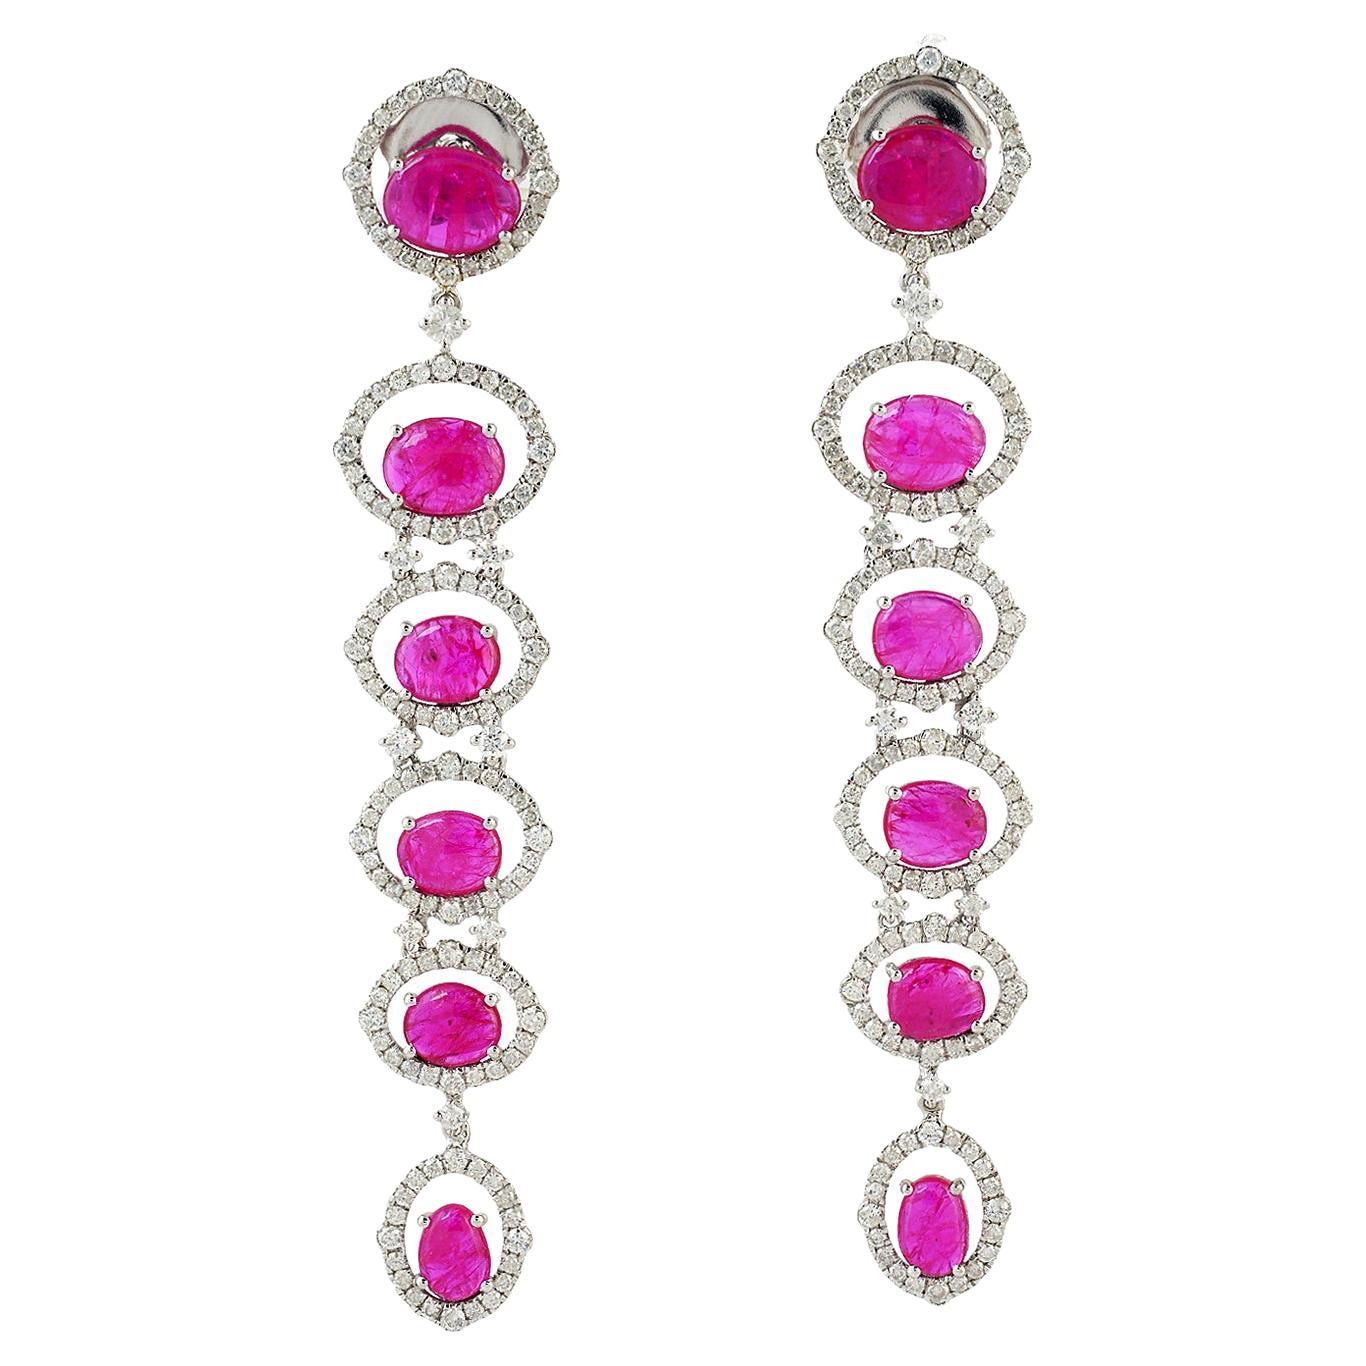 Multi Tier Ruby Dangle Earrings With Diamonds Made In 18k White Gold